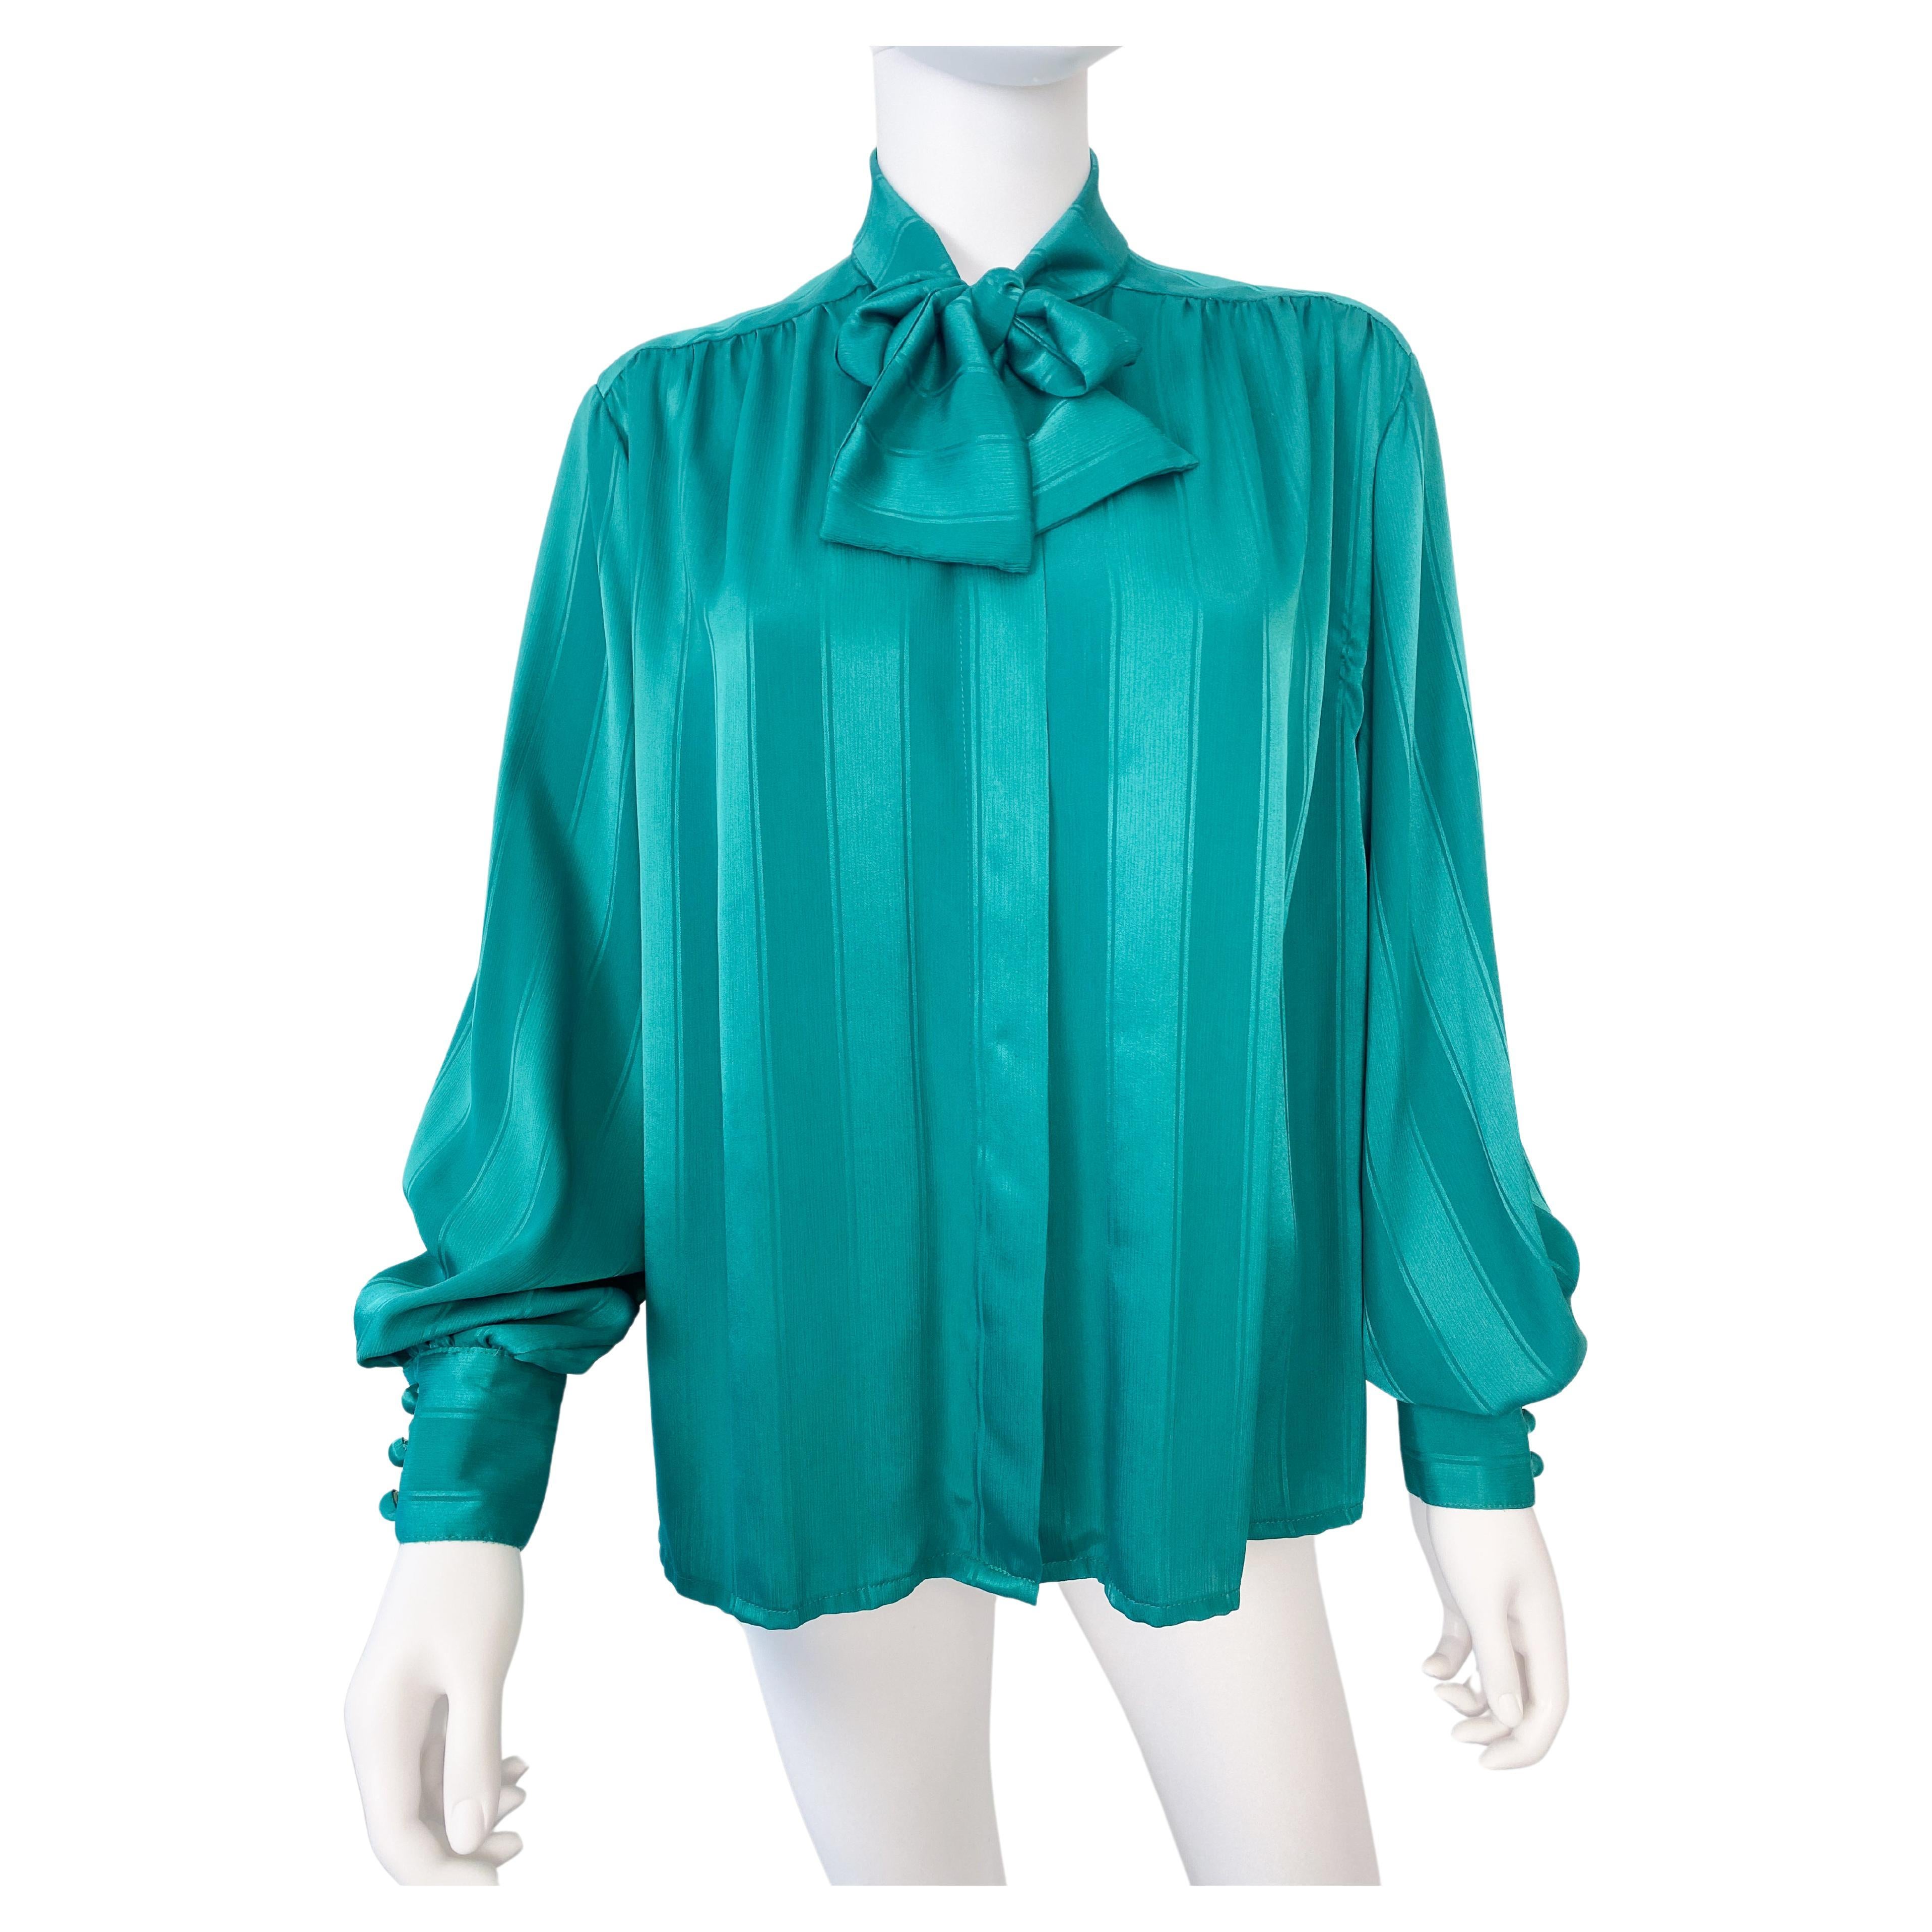 Vintage 1980s Silky Polyester Bow Blouse Top Emerald Green Stripes Size 12/14 For Sale